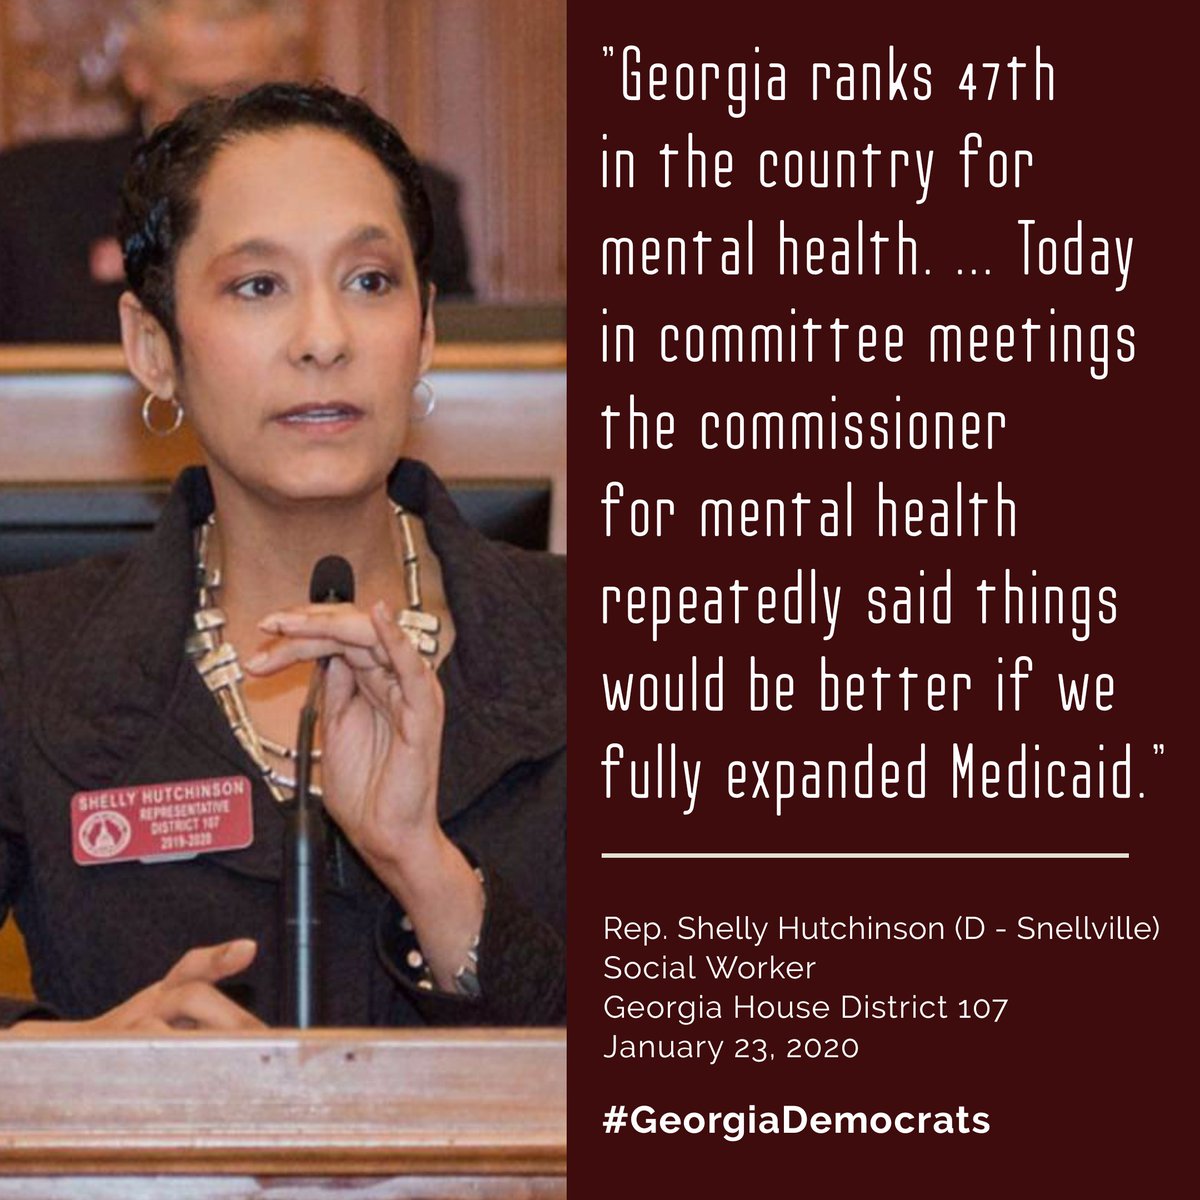 Thx to @Shellyforga for reporting from the frontlines of Gov Kemp's budget cuts. The message is loud & clear: #MedicaidExpansion would help both patients & providers who are stuck in a system that fails to adequately address the community's needs. #NoPatientLeftBehind #gapol